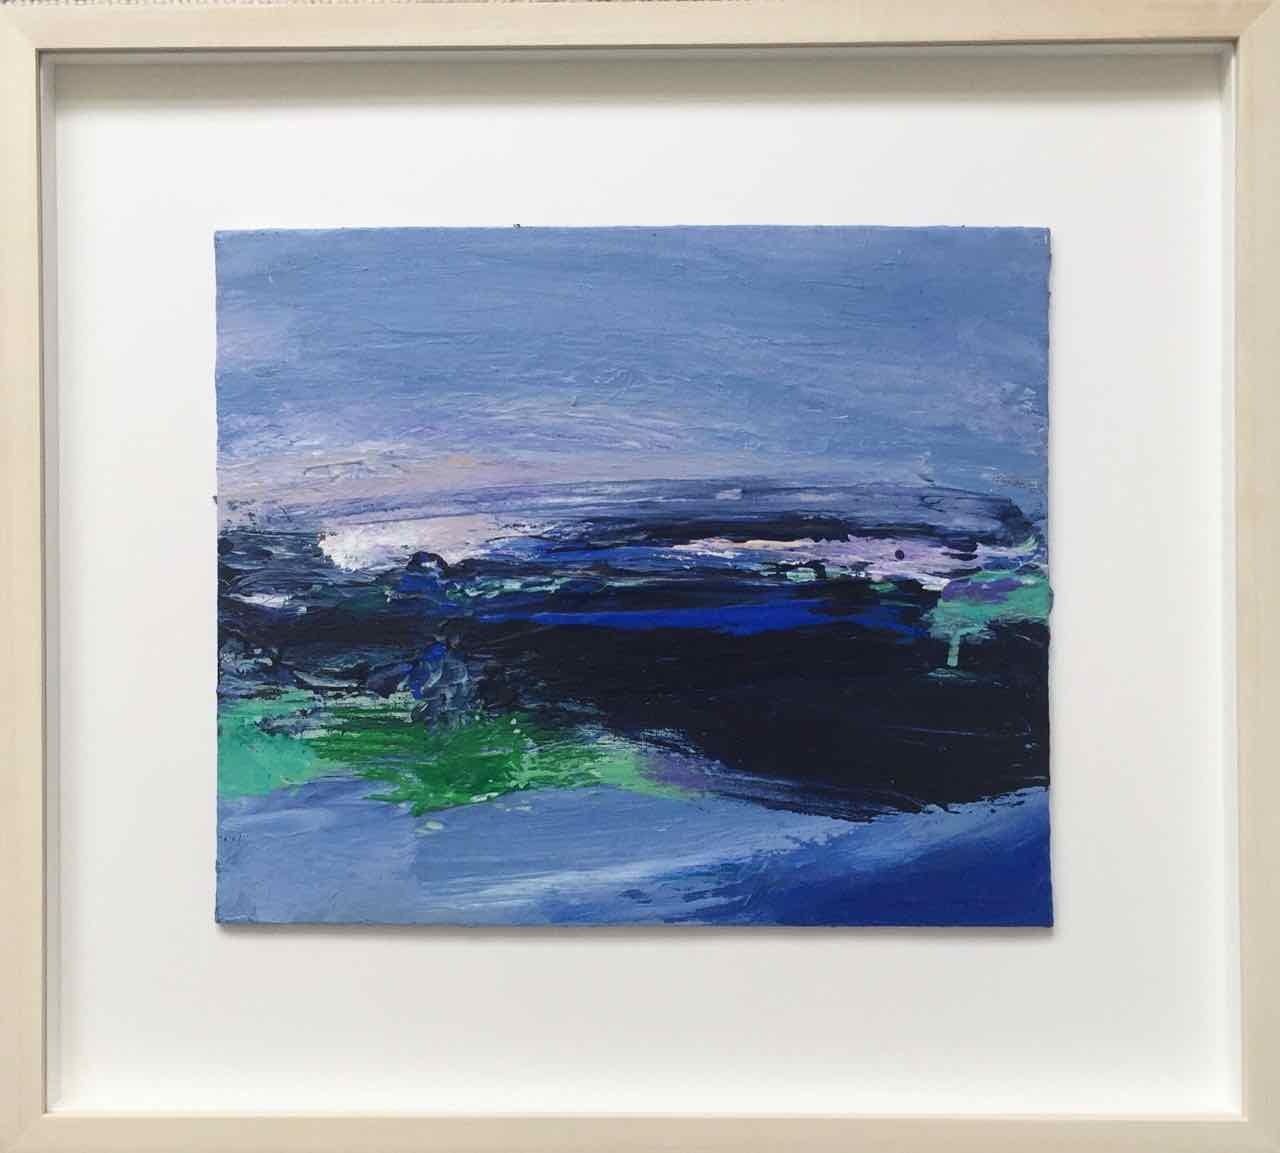 Salcombe Harbour: Small, Abstract, Gestural Painting in blue by Deborah Lanyon 2